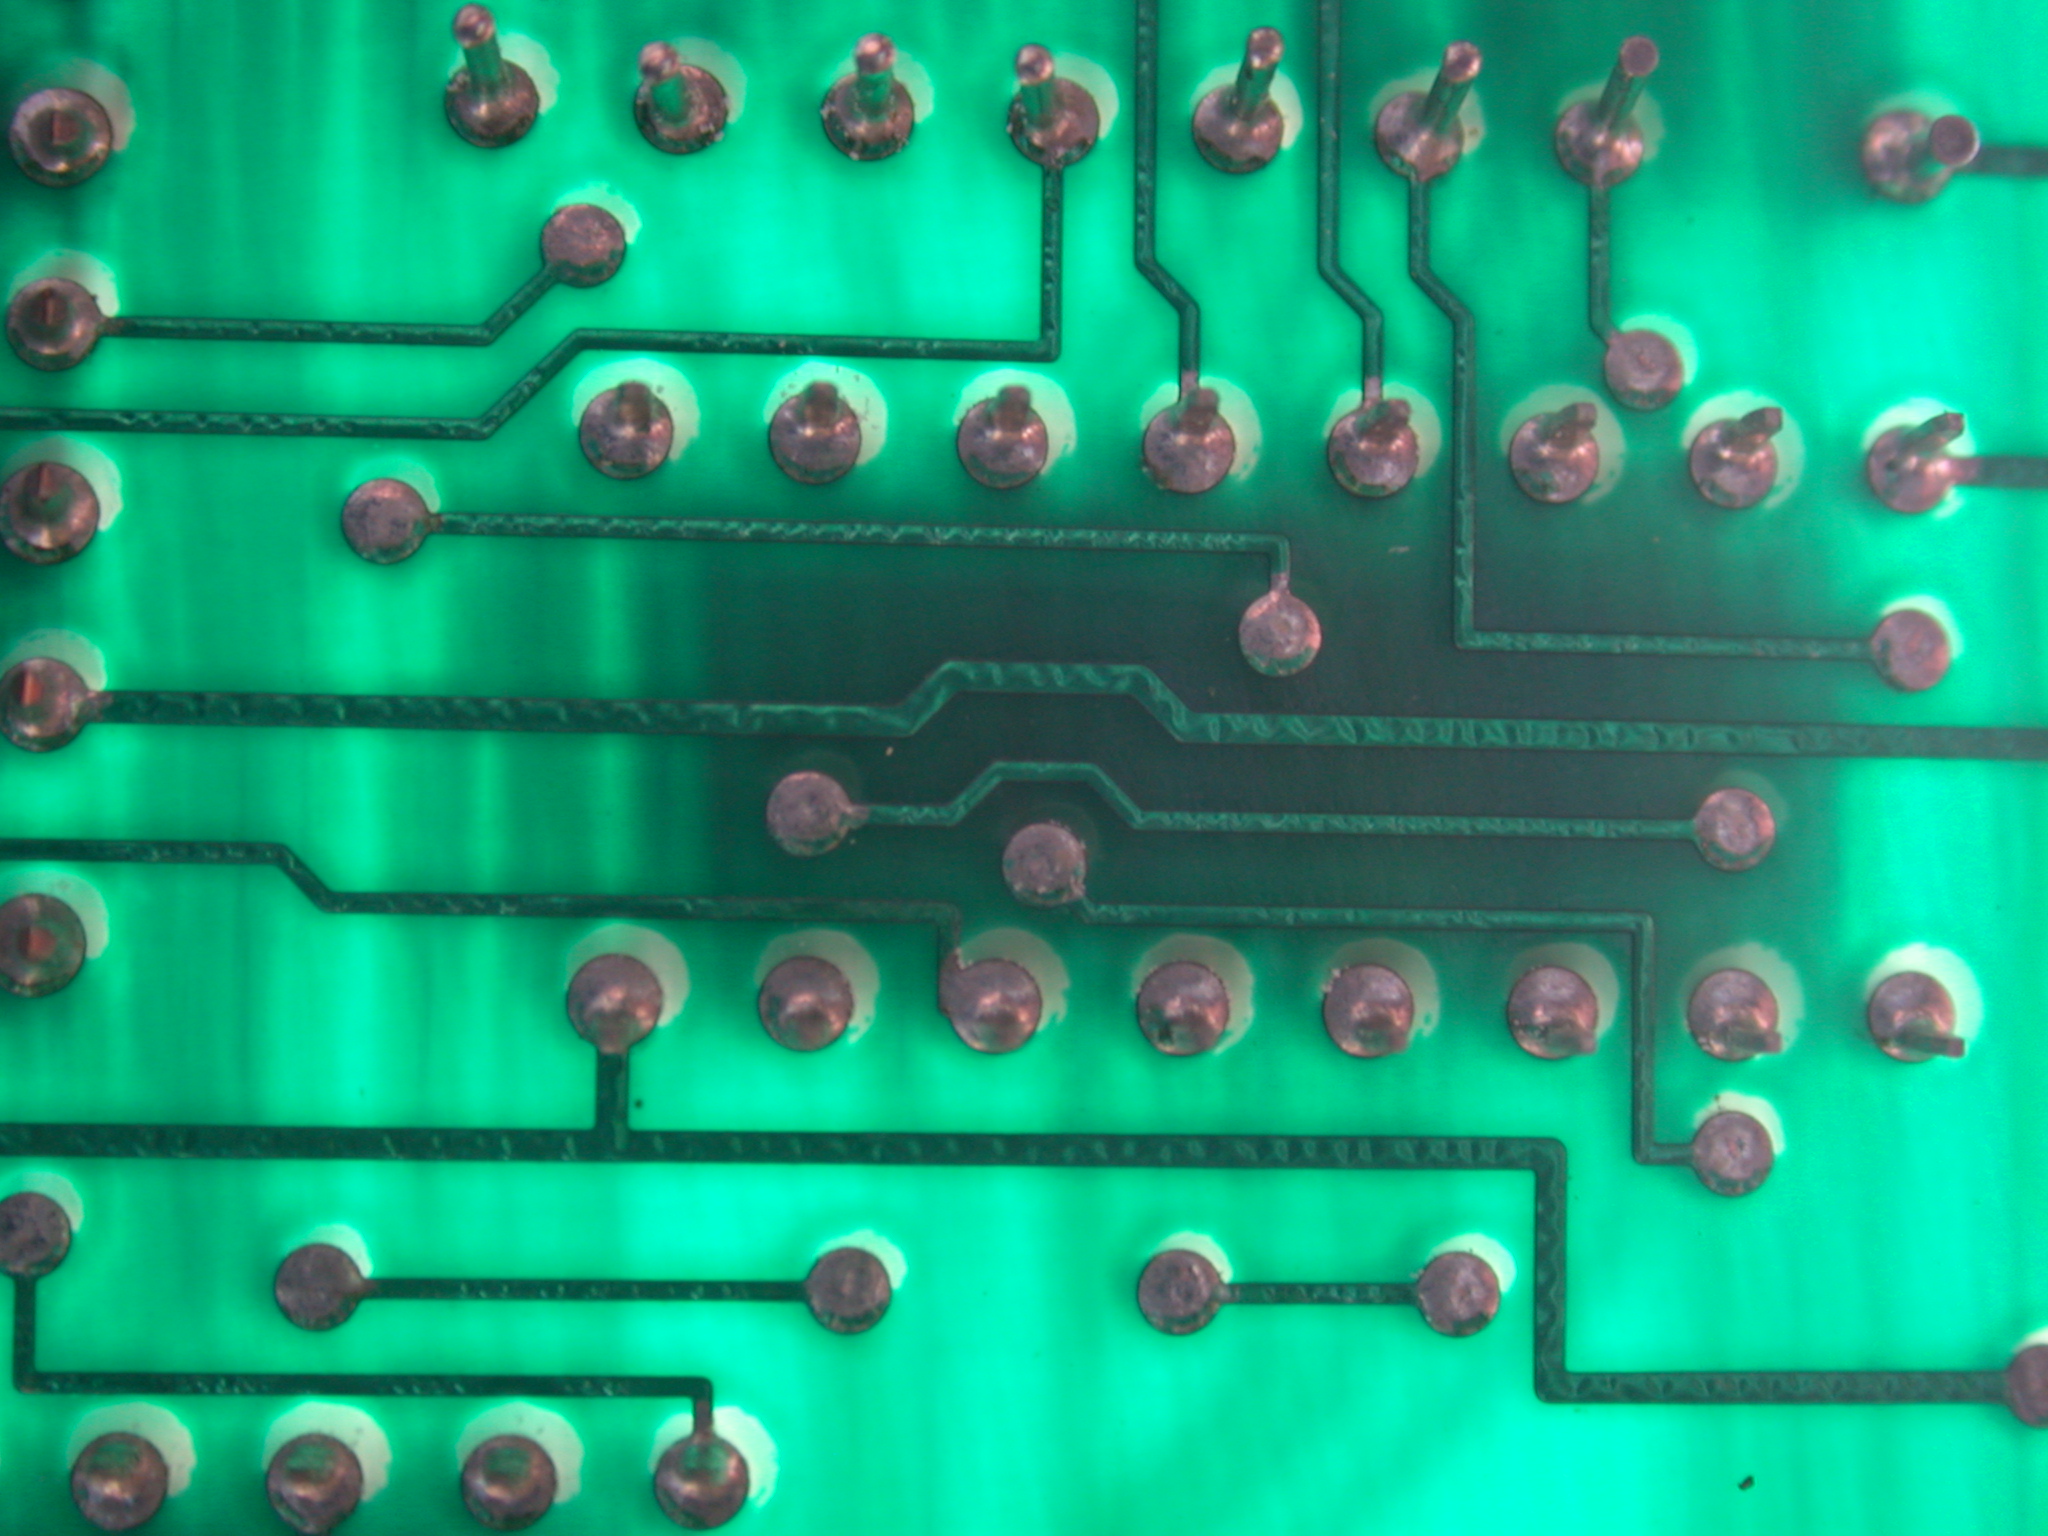 http://www.imageafter.com/image.php?image=b19objects_circuits054.jpg&dl=1